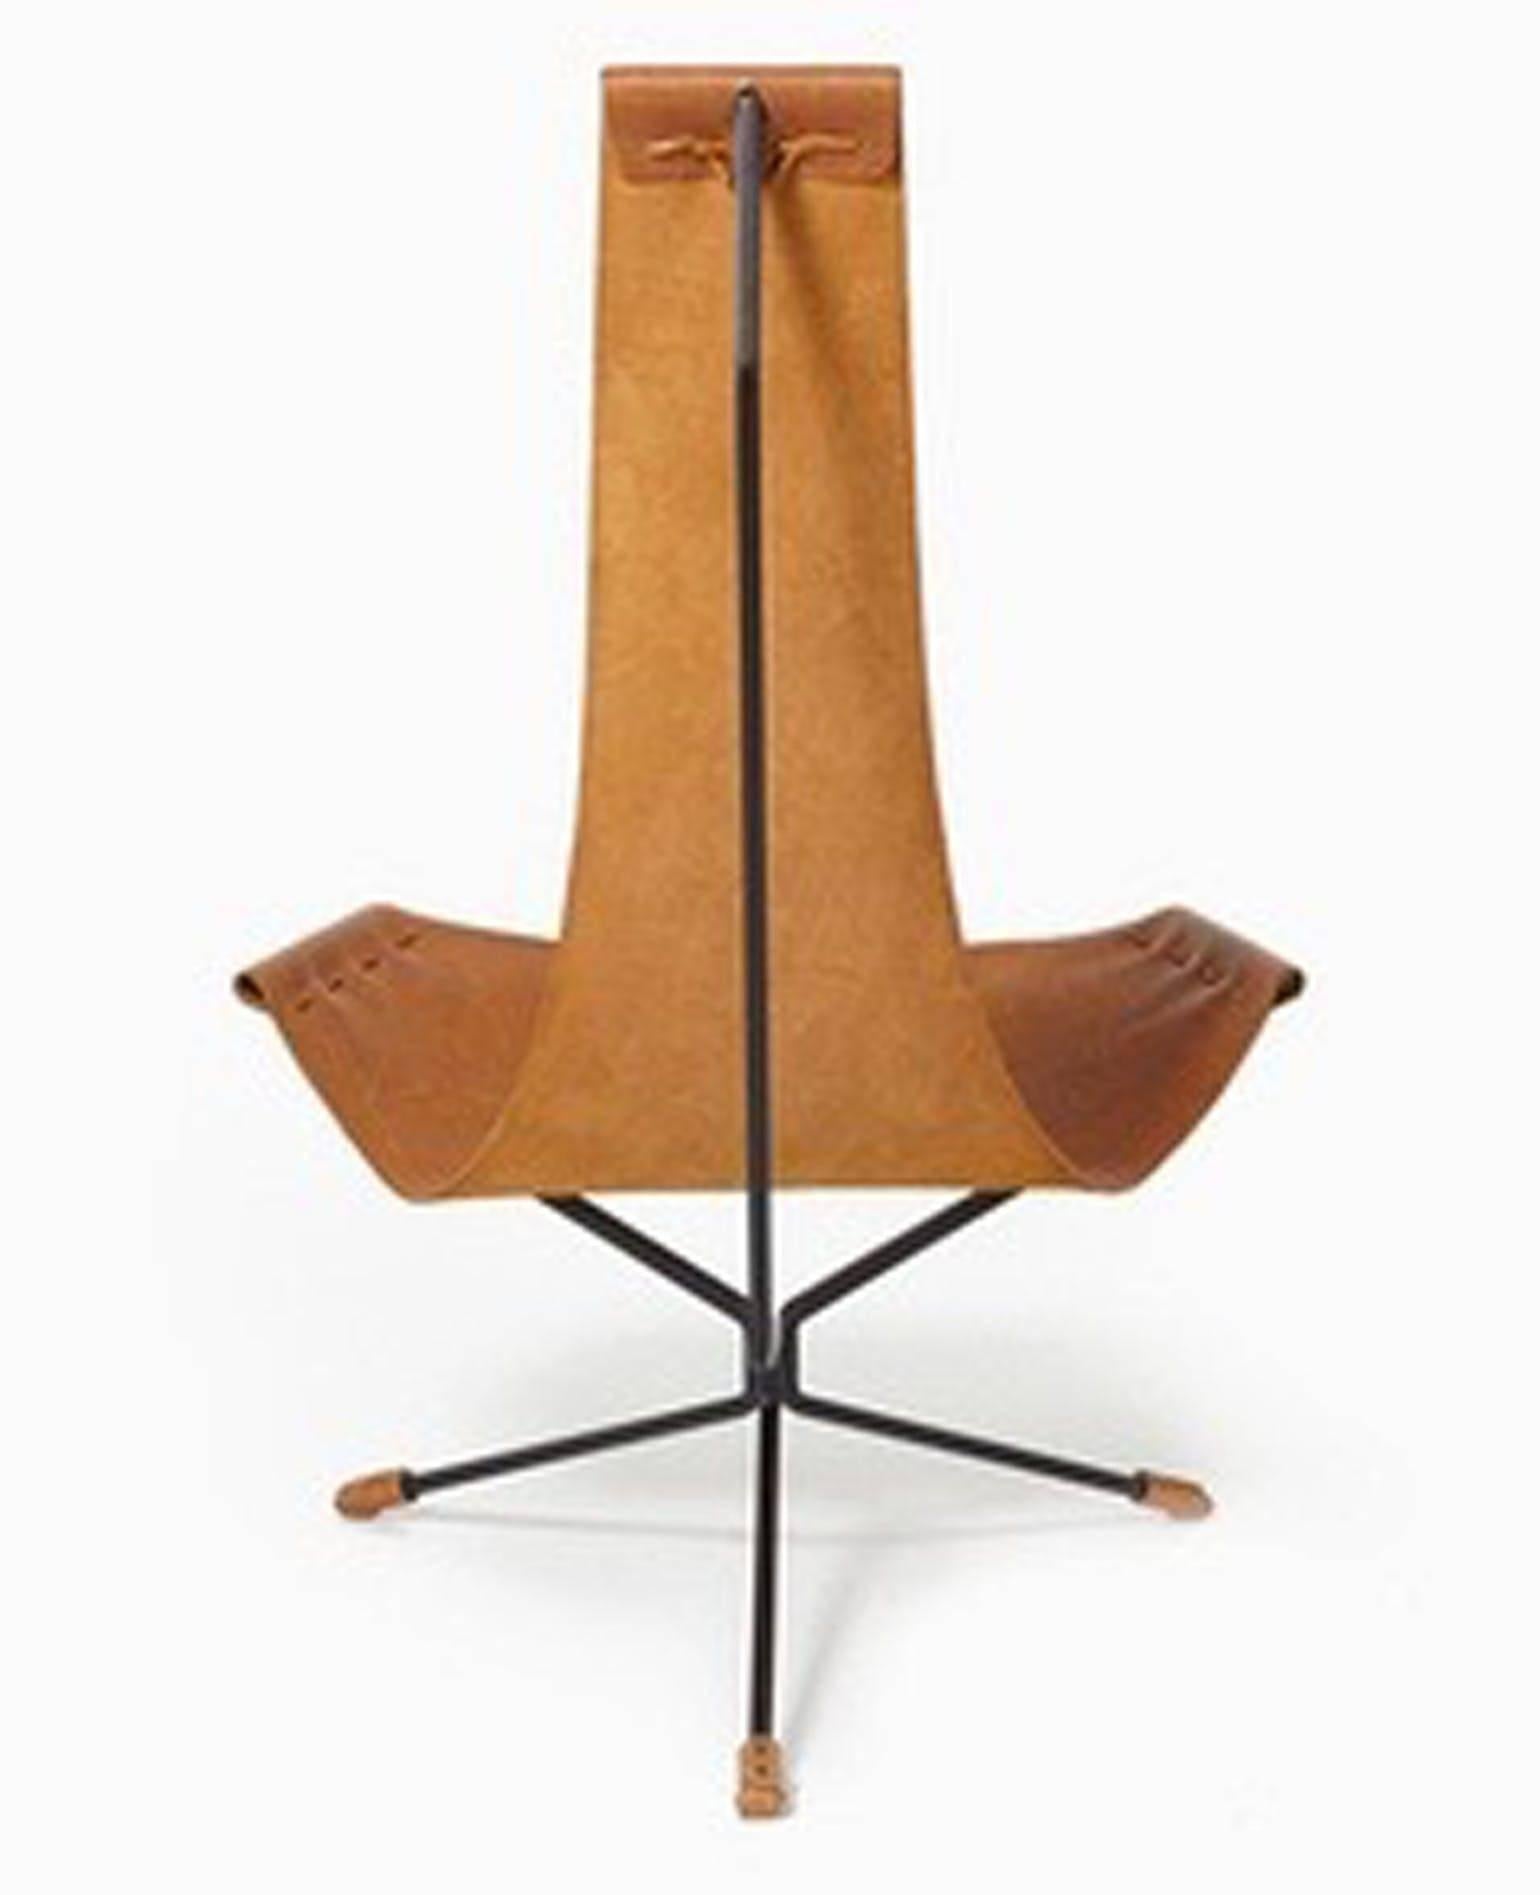 The Lotus chair designed by Daniel Wenger in the 1960s. Handmade during the 1970s and currently since 2009 by Daniel and son Sam. Solid steel powder-coated frame with heavy handpicked latigo leather sling.
The large version has more spring in the